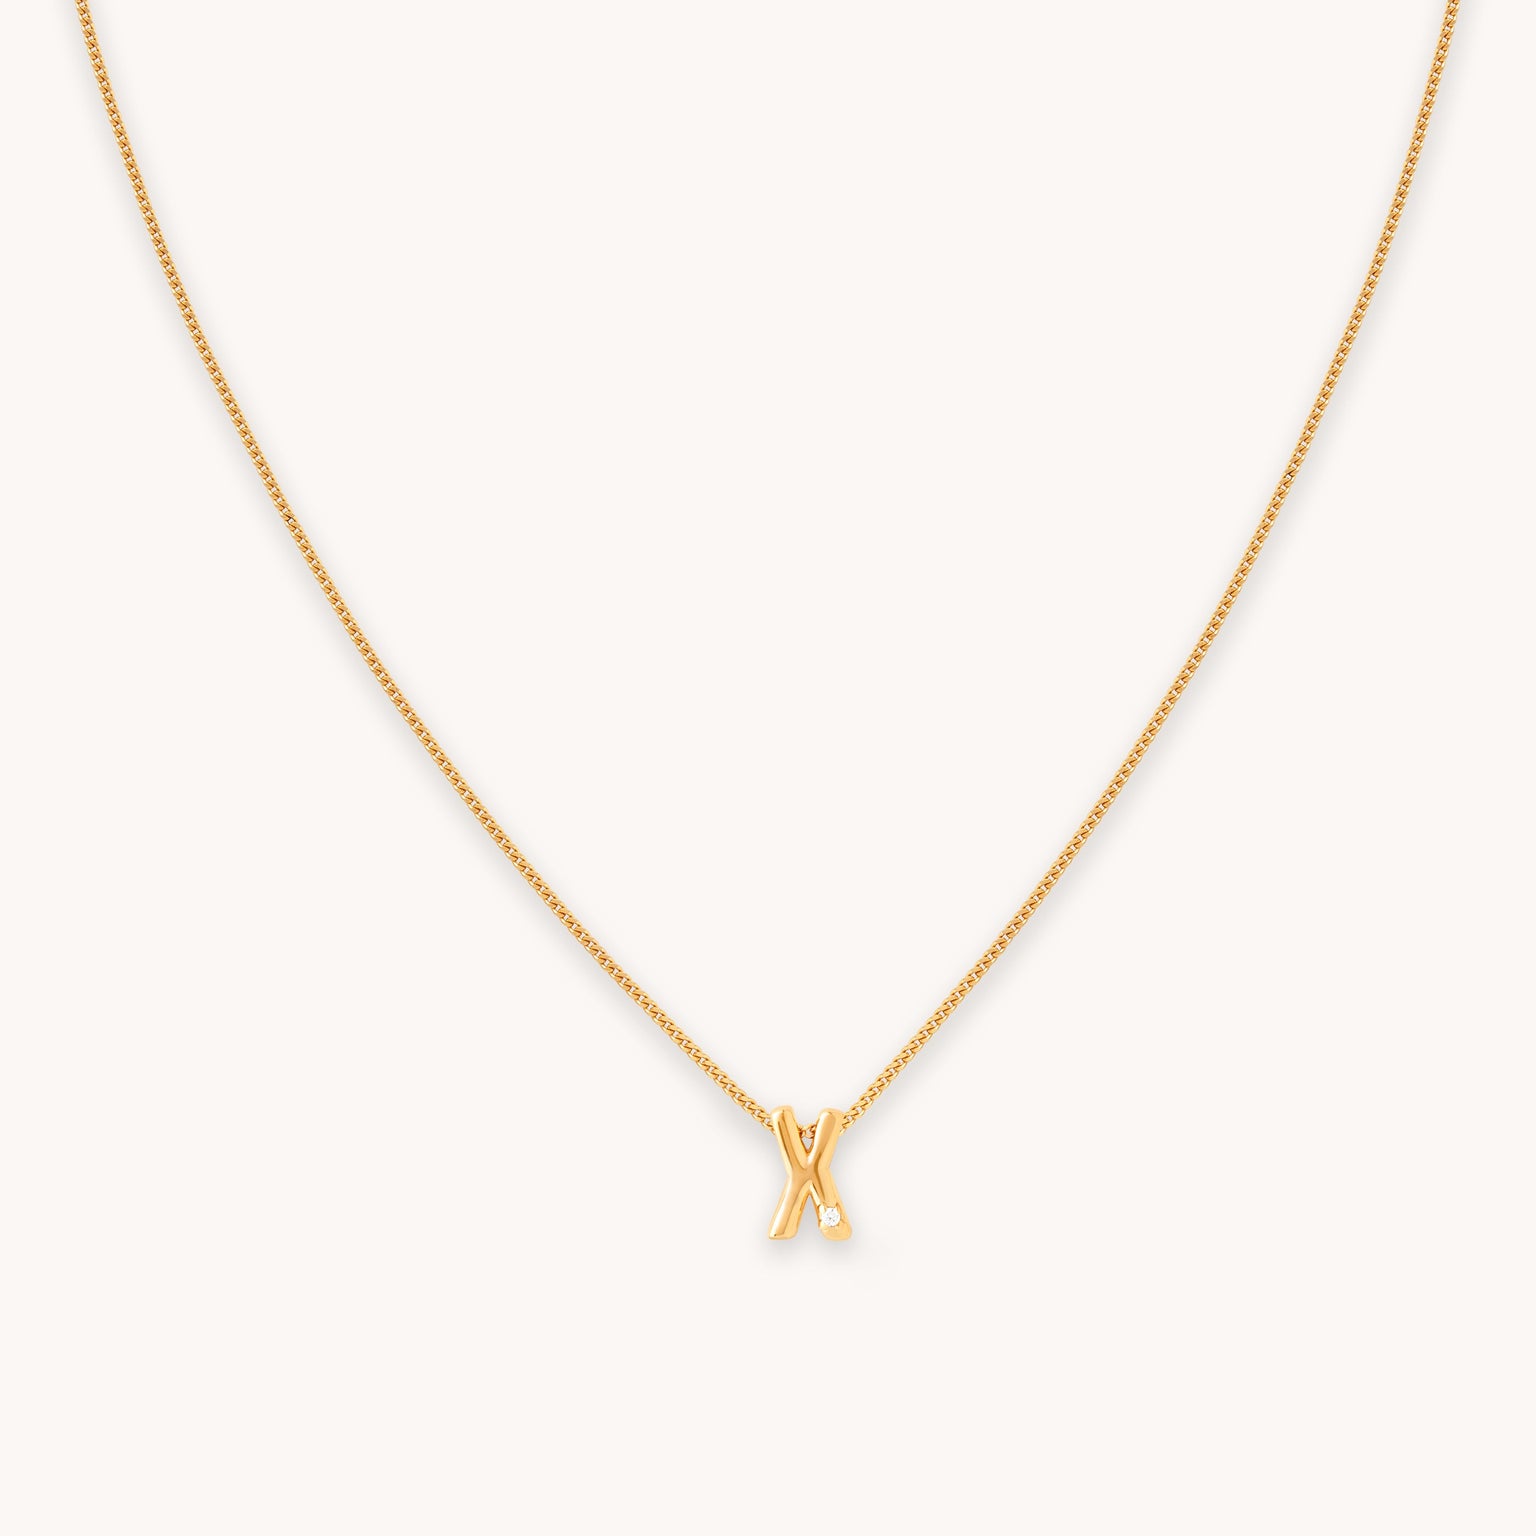 X Initial Pendant Necklace in Gold